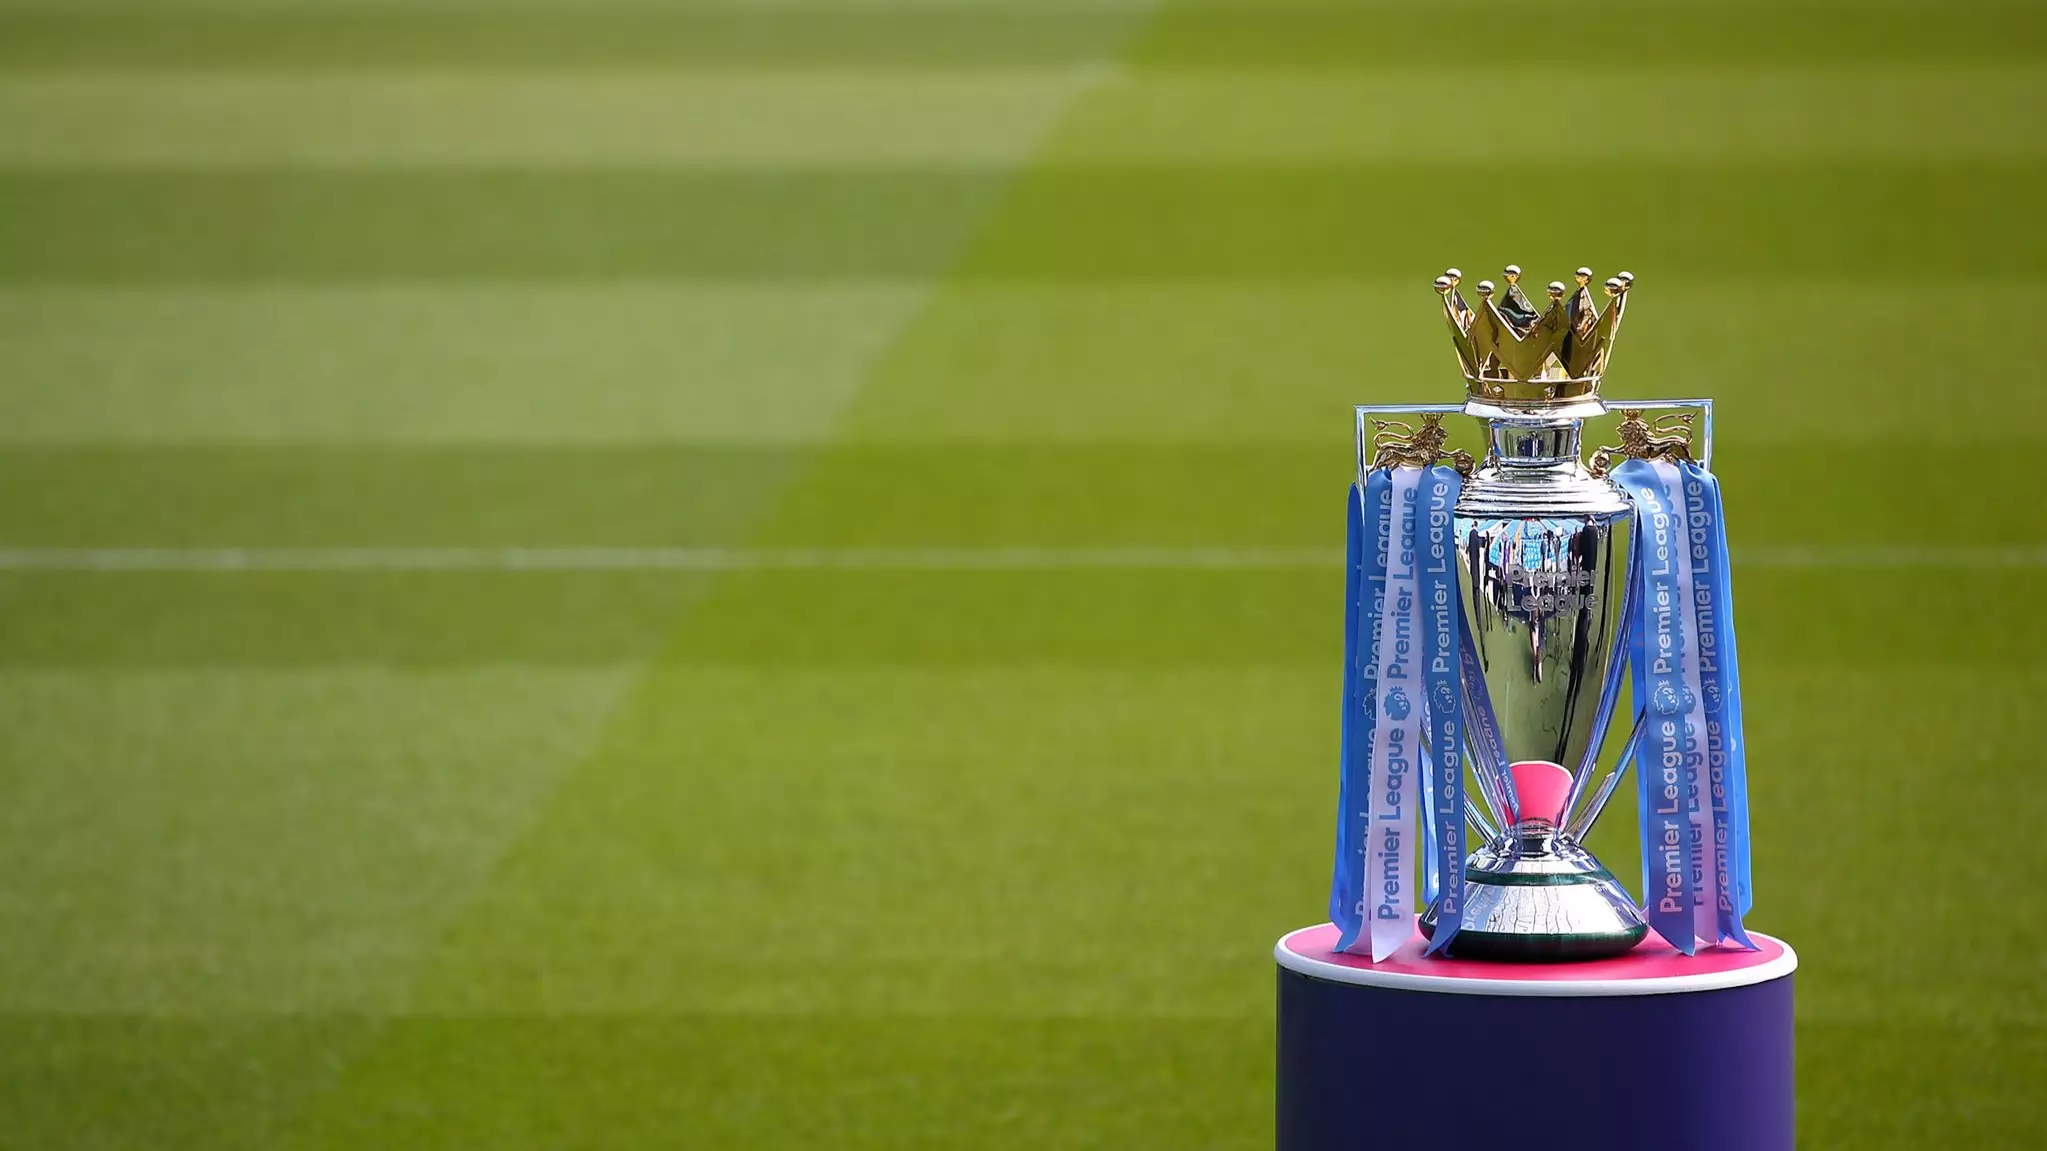 It'll Cost Up To £900 To Watch All The Televised Premier League Games Next Season